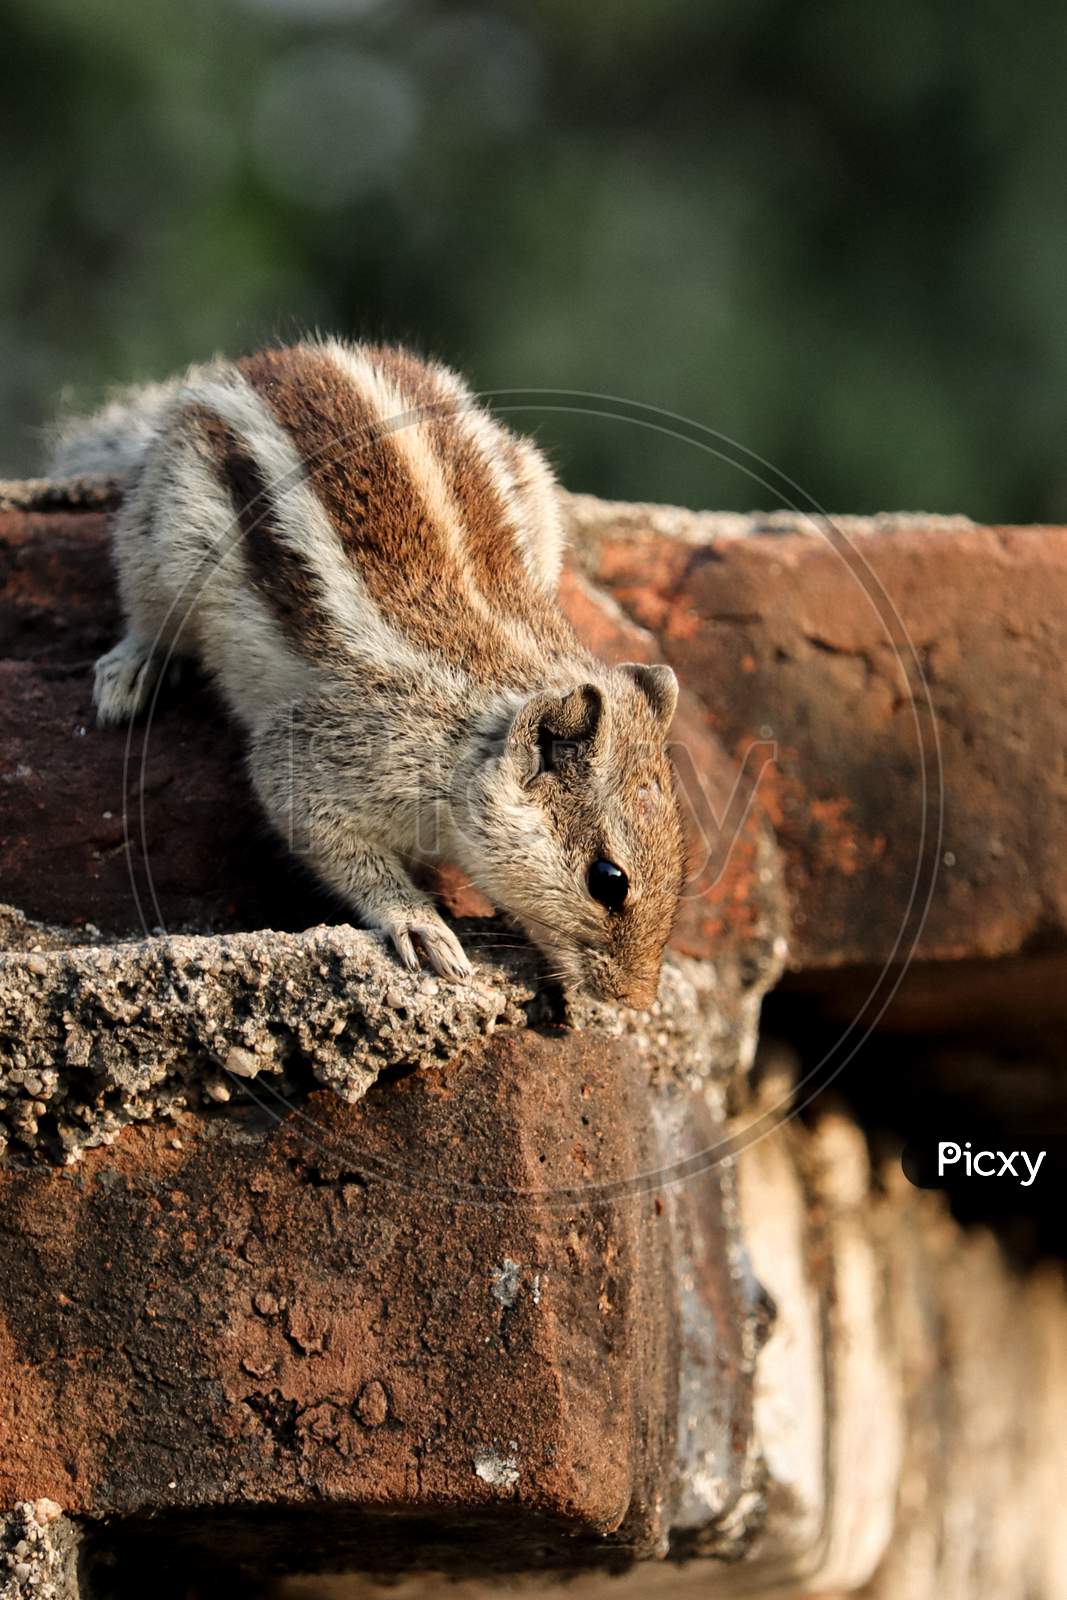 The Indian Palm Squirrel Or Three-Striped Palm Squirrel Sitting On The Farm Wall And Finding Food At Evening.